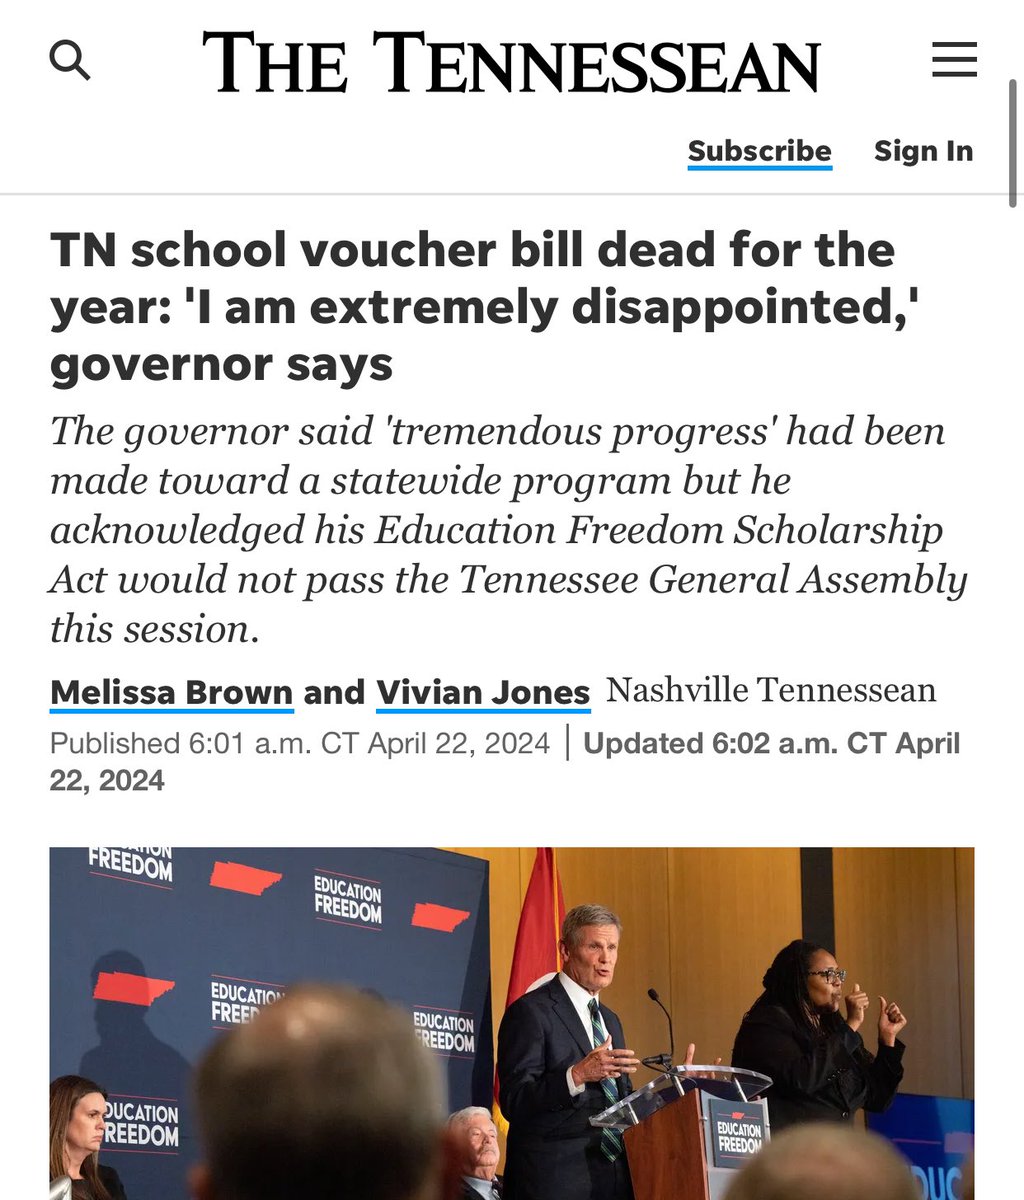 ‼️ THERE IT IS — @GovBillLee makes it official, his voucher scam is dead for the year: “Unfortunately it has become clear that there is not a pathway for the bill during this legislative session.' He says he will try again next year. tennessean.com/story/news/pol…